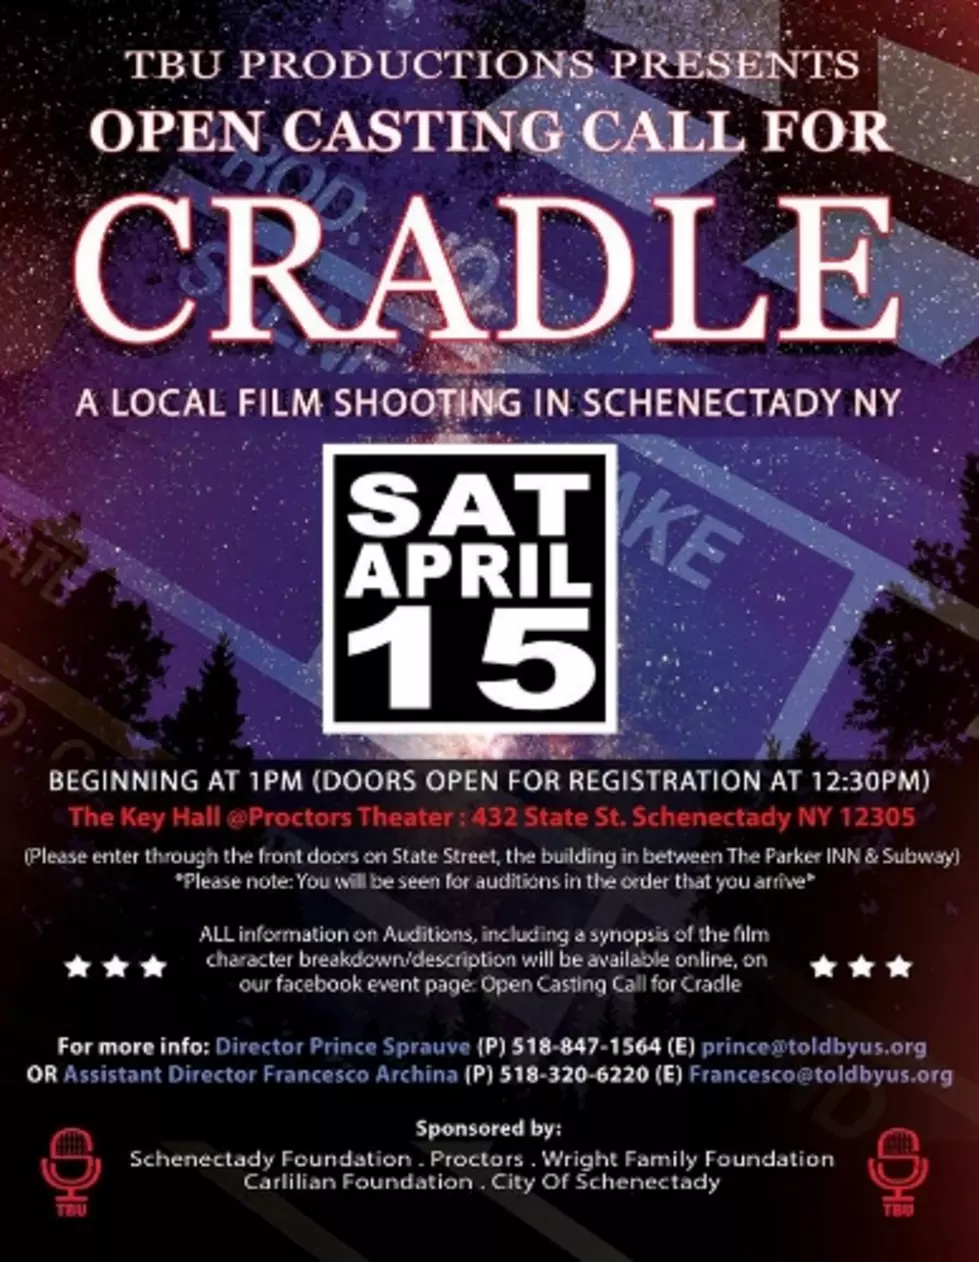 Open Casting Call For Cradle At Proctors